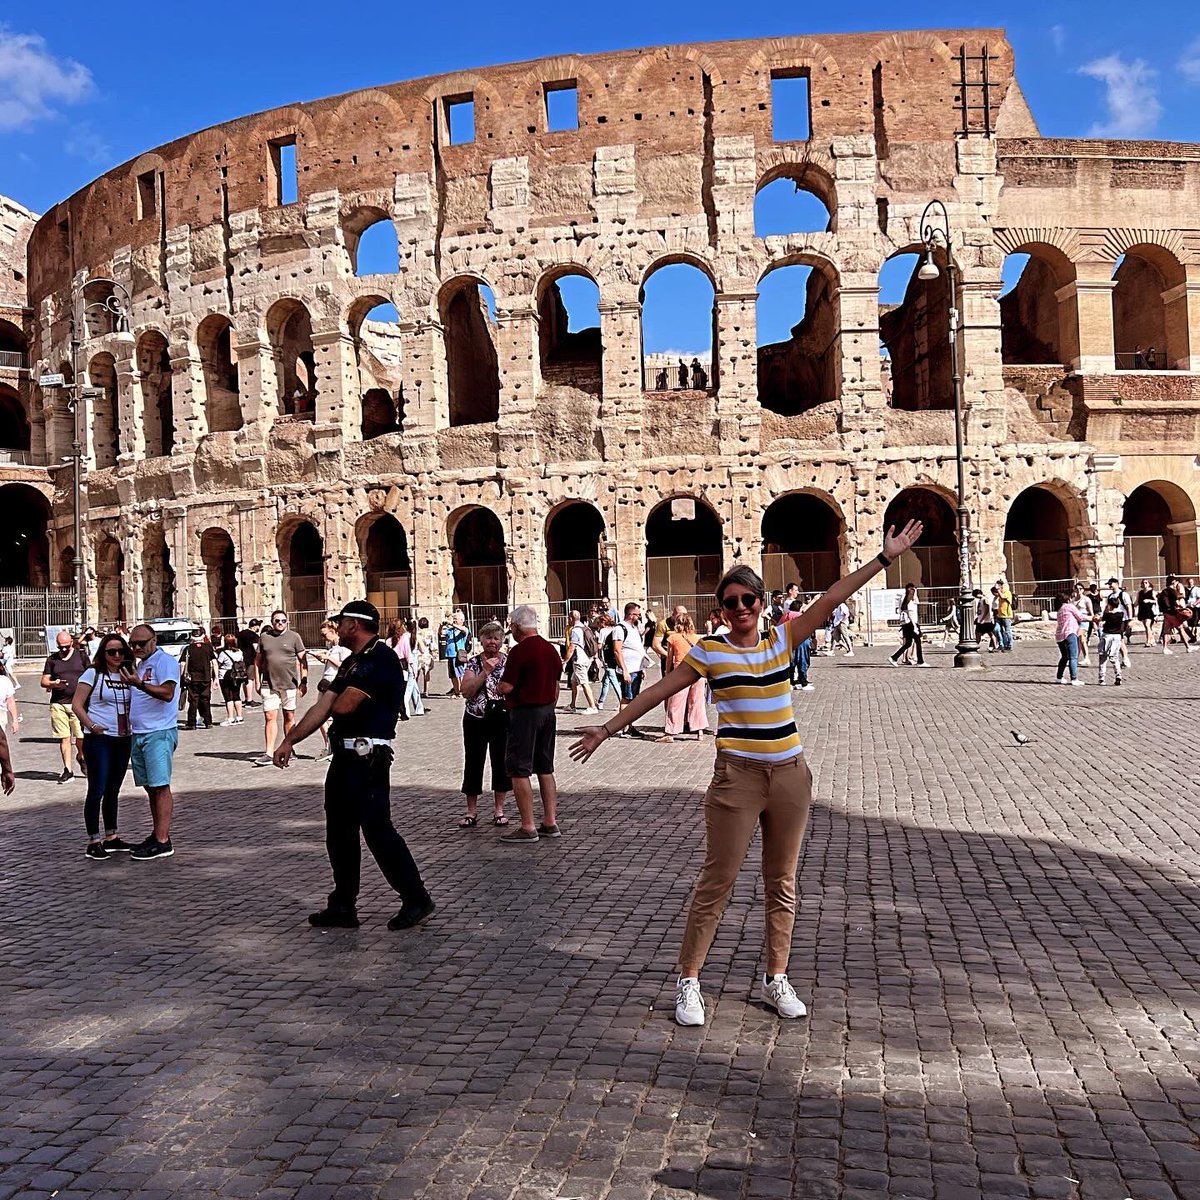 #colosseo #colosseum #art #artwork #architecture #photography #travel #travelphotography #love #igersroma #roma #italy